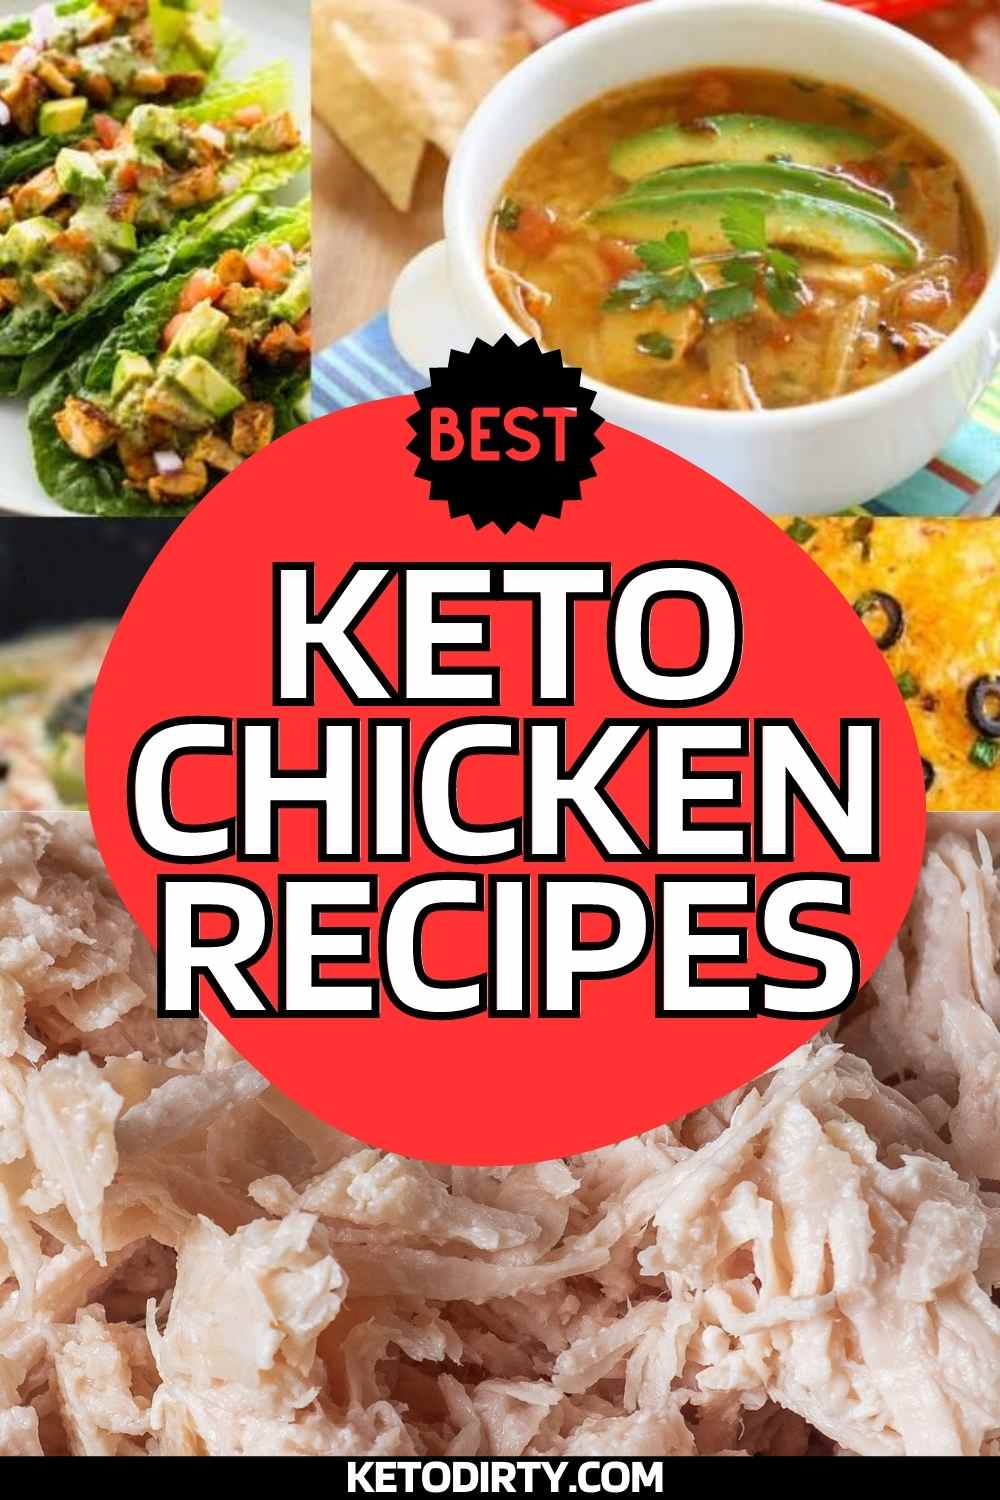 Keto Chicken Recipes - 15+ Easy Low Carb Chicken Meal Ideas